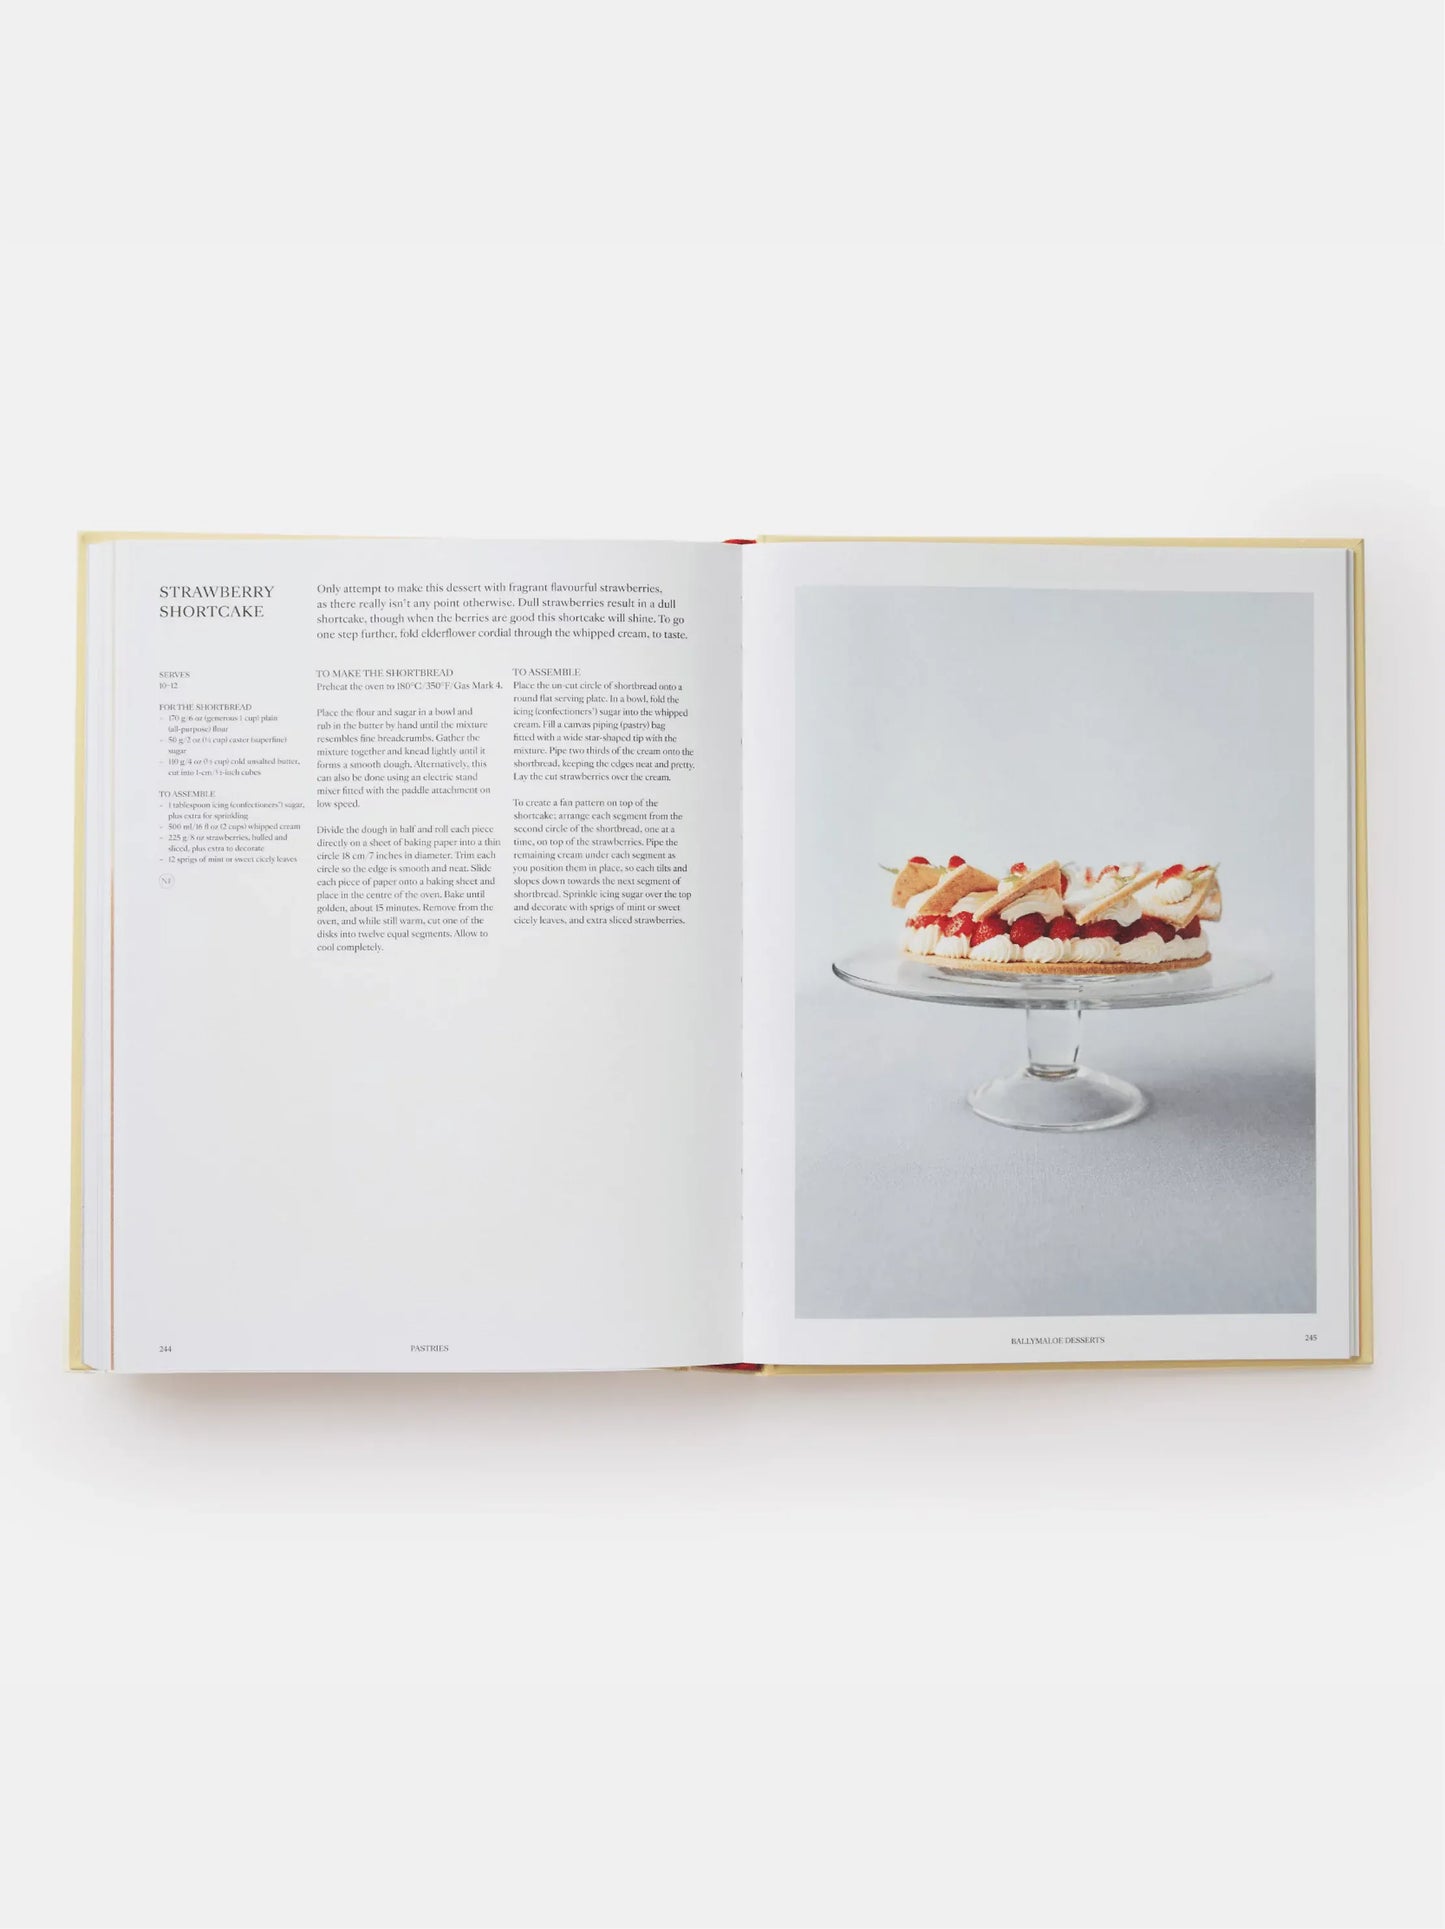 Ballymaloe Desserts: Iconic Recipes and Stories from Ireland Cookbook